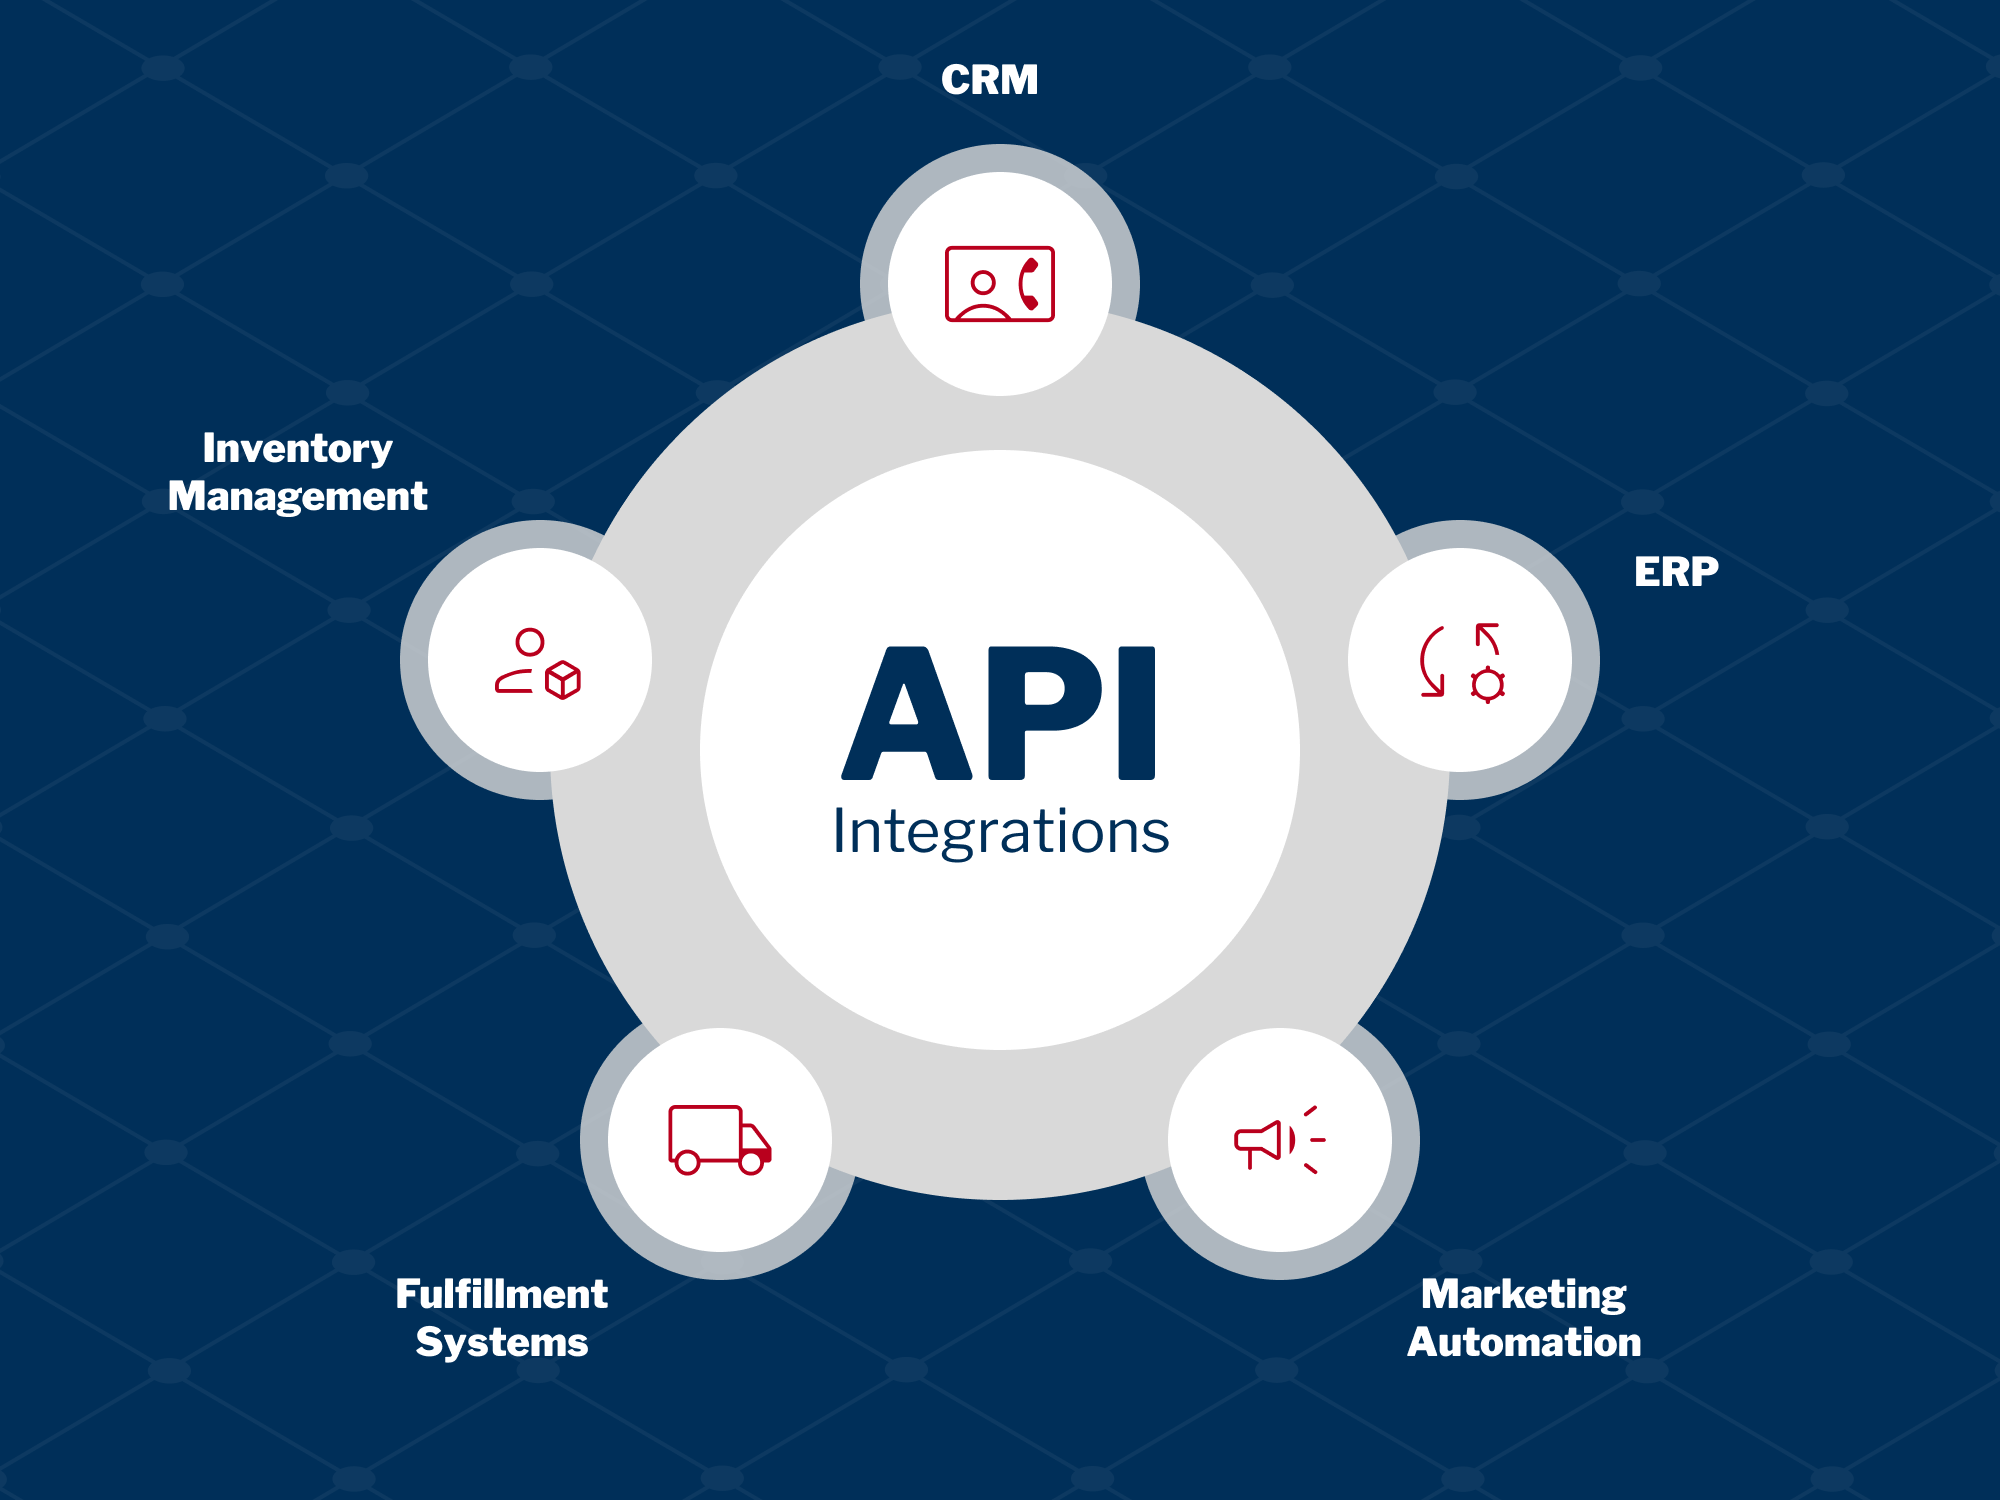 Diagram showing API integrations with CRM, ERP, Inventory Management, Fulfillment Systems, and Marketing Automation.